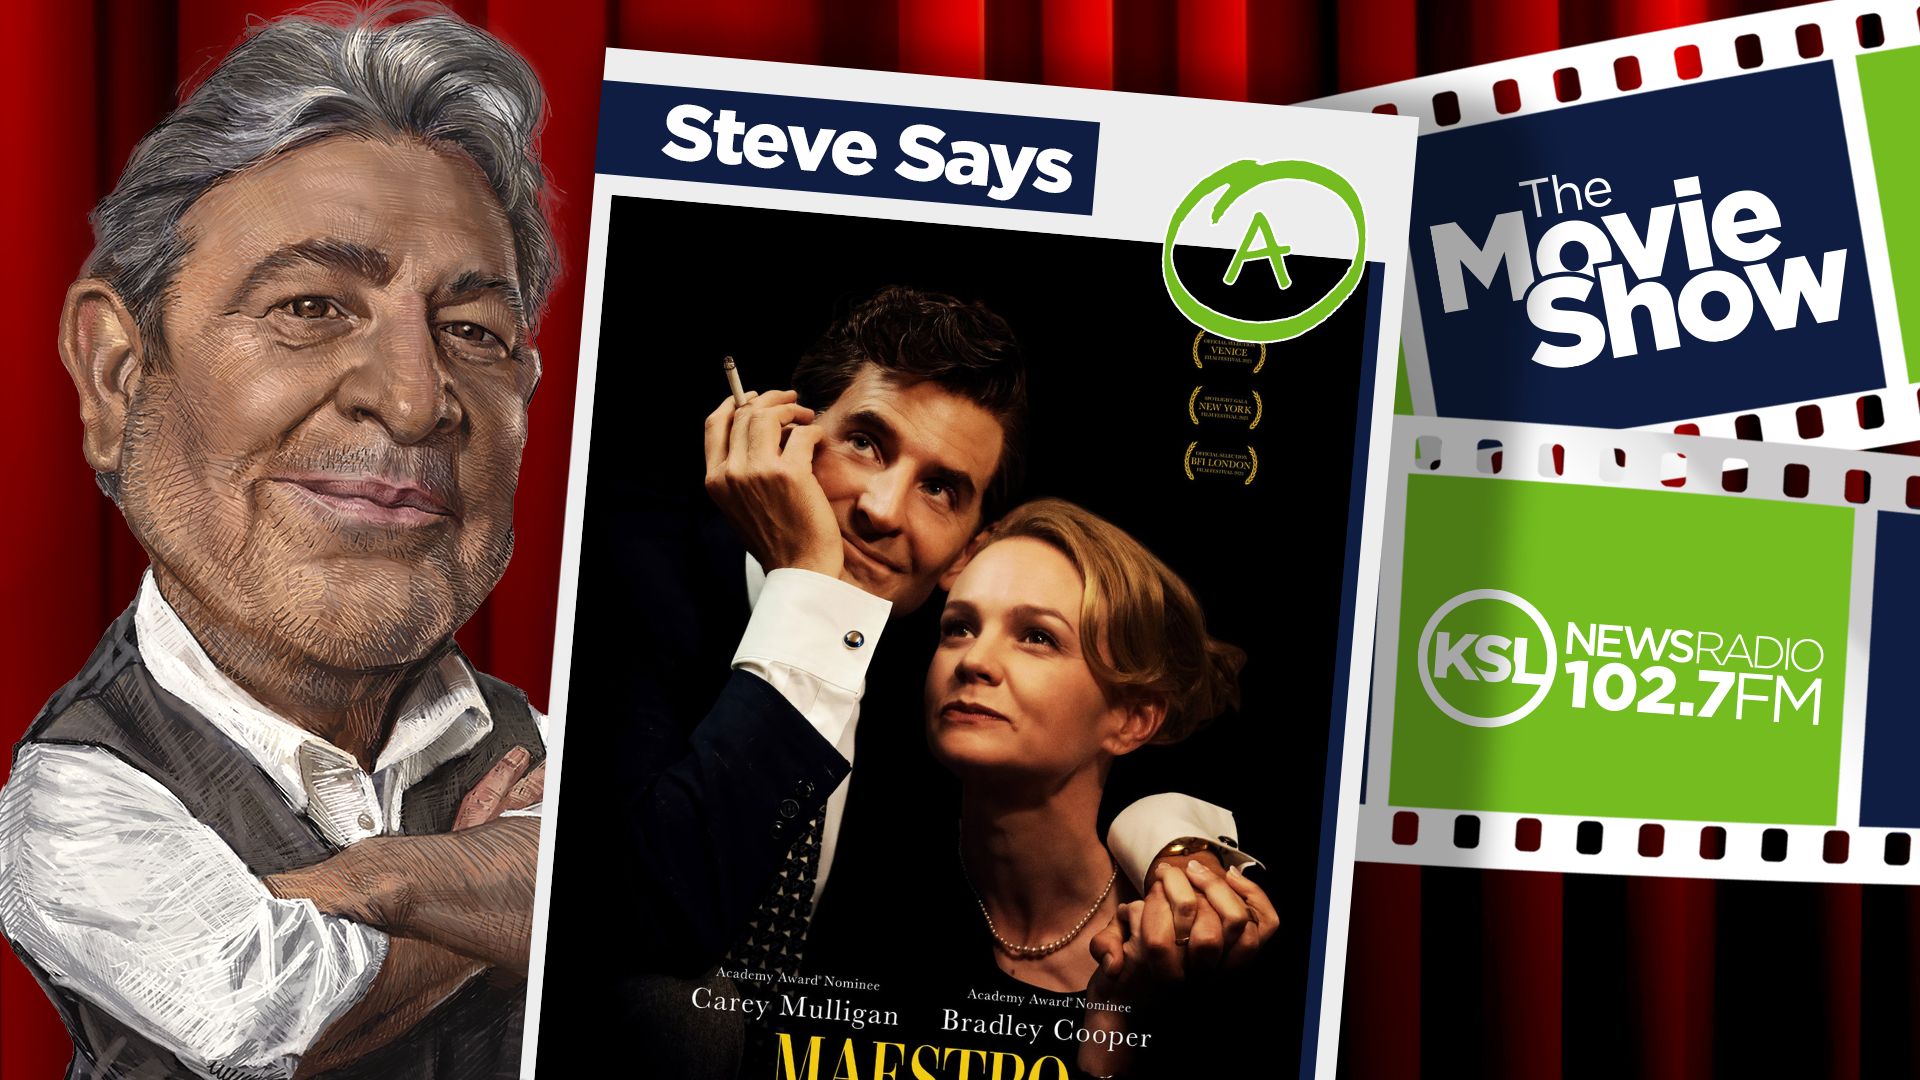 KSL Movie Show co-host Steve Salles says "Maestro" is a fine picture you won't want to miss....